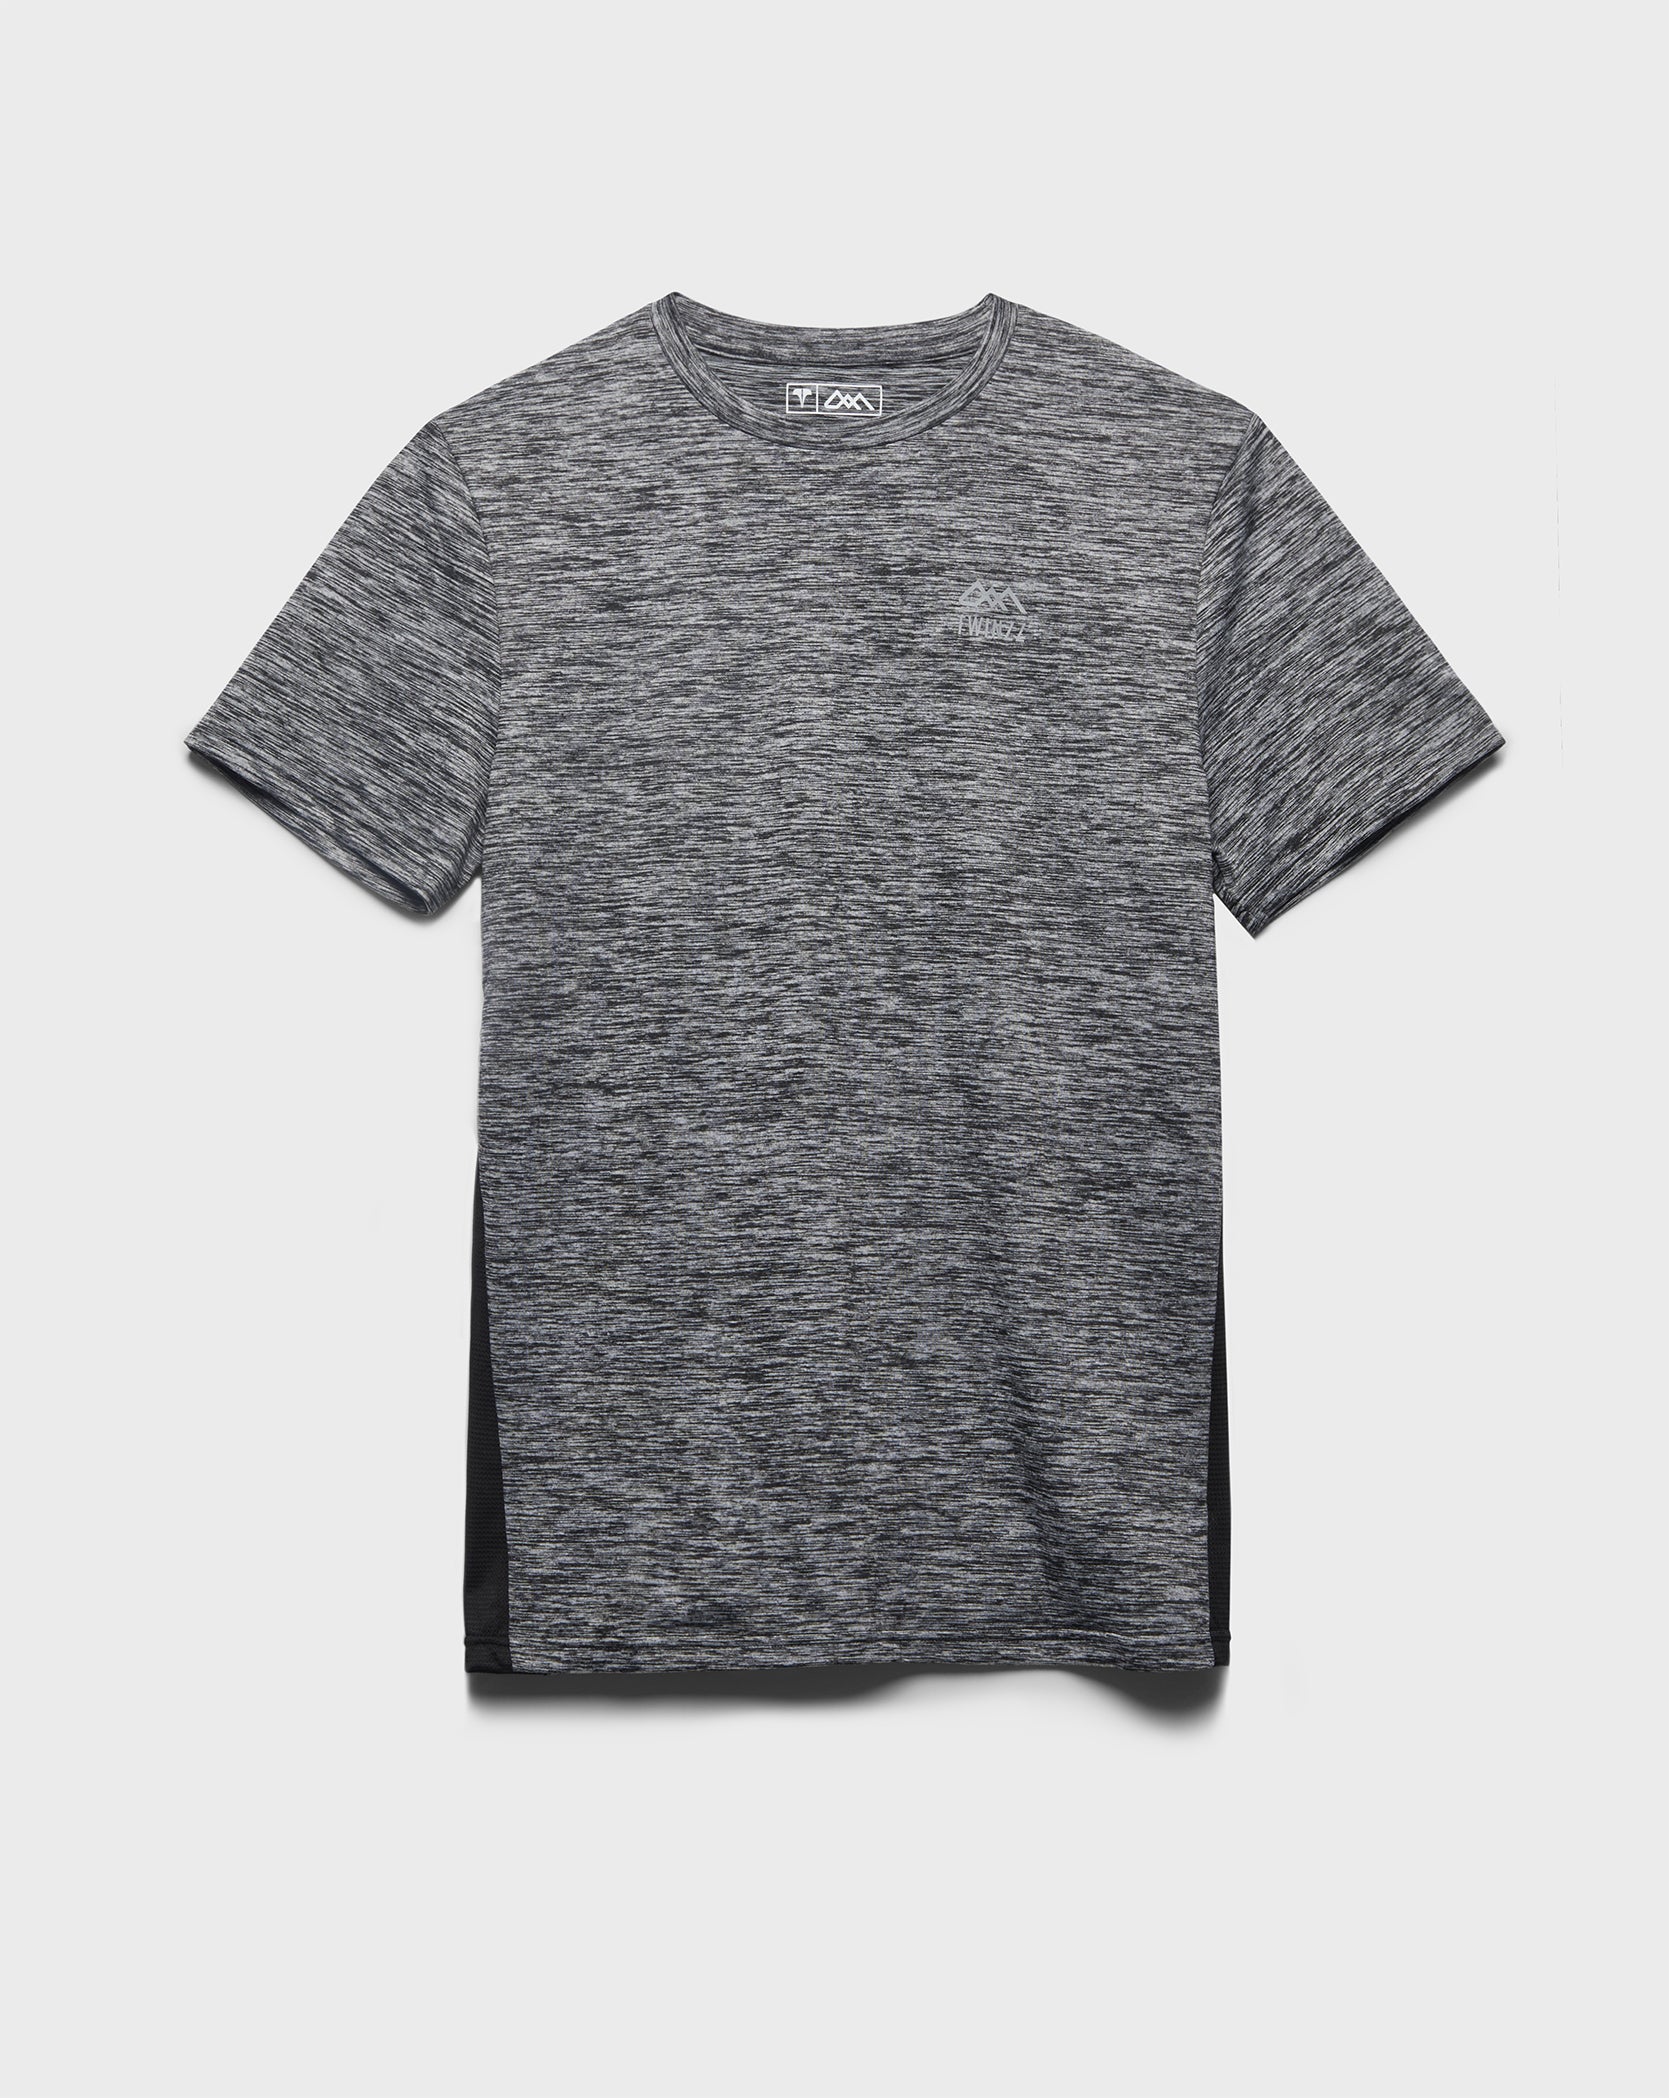 Twinzz grey and black active tee